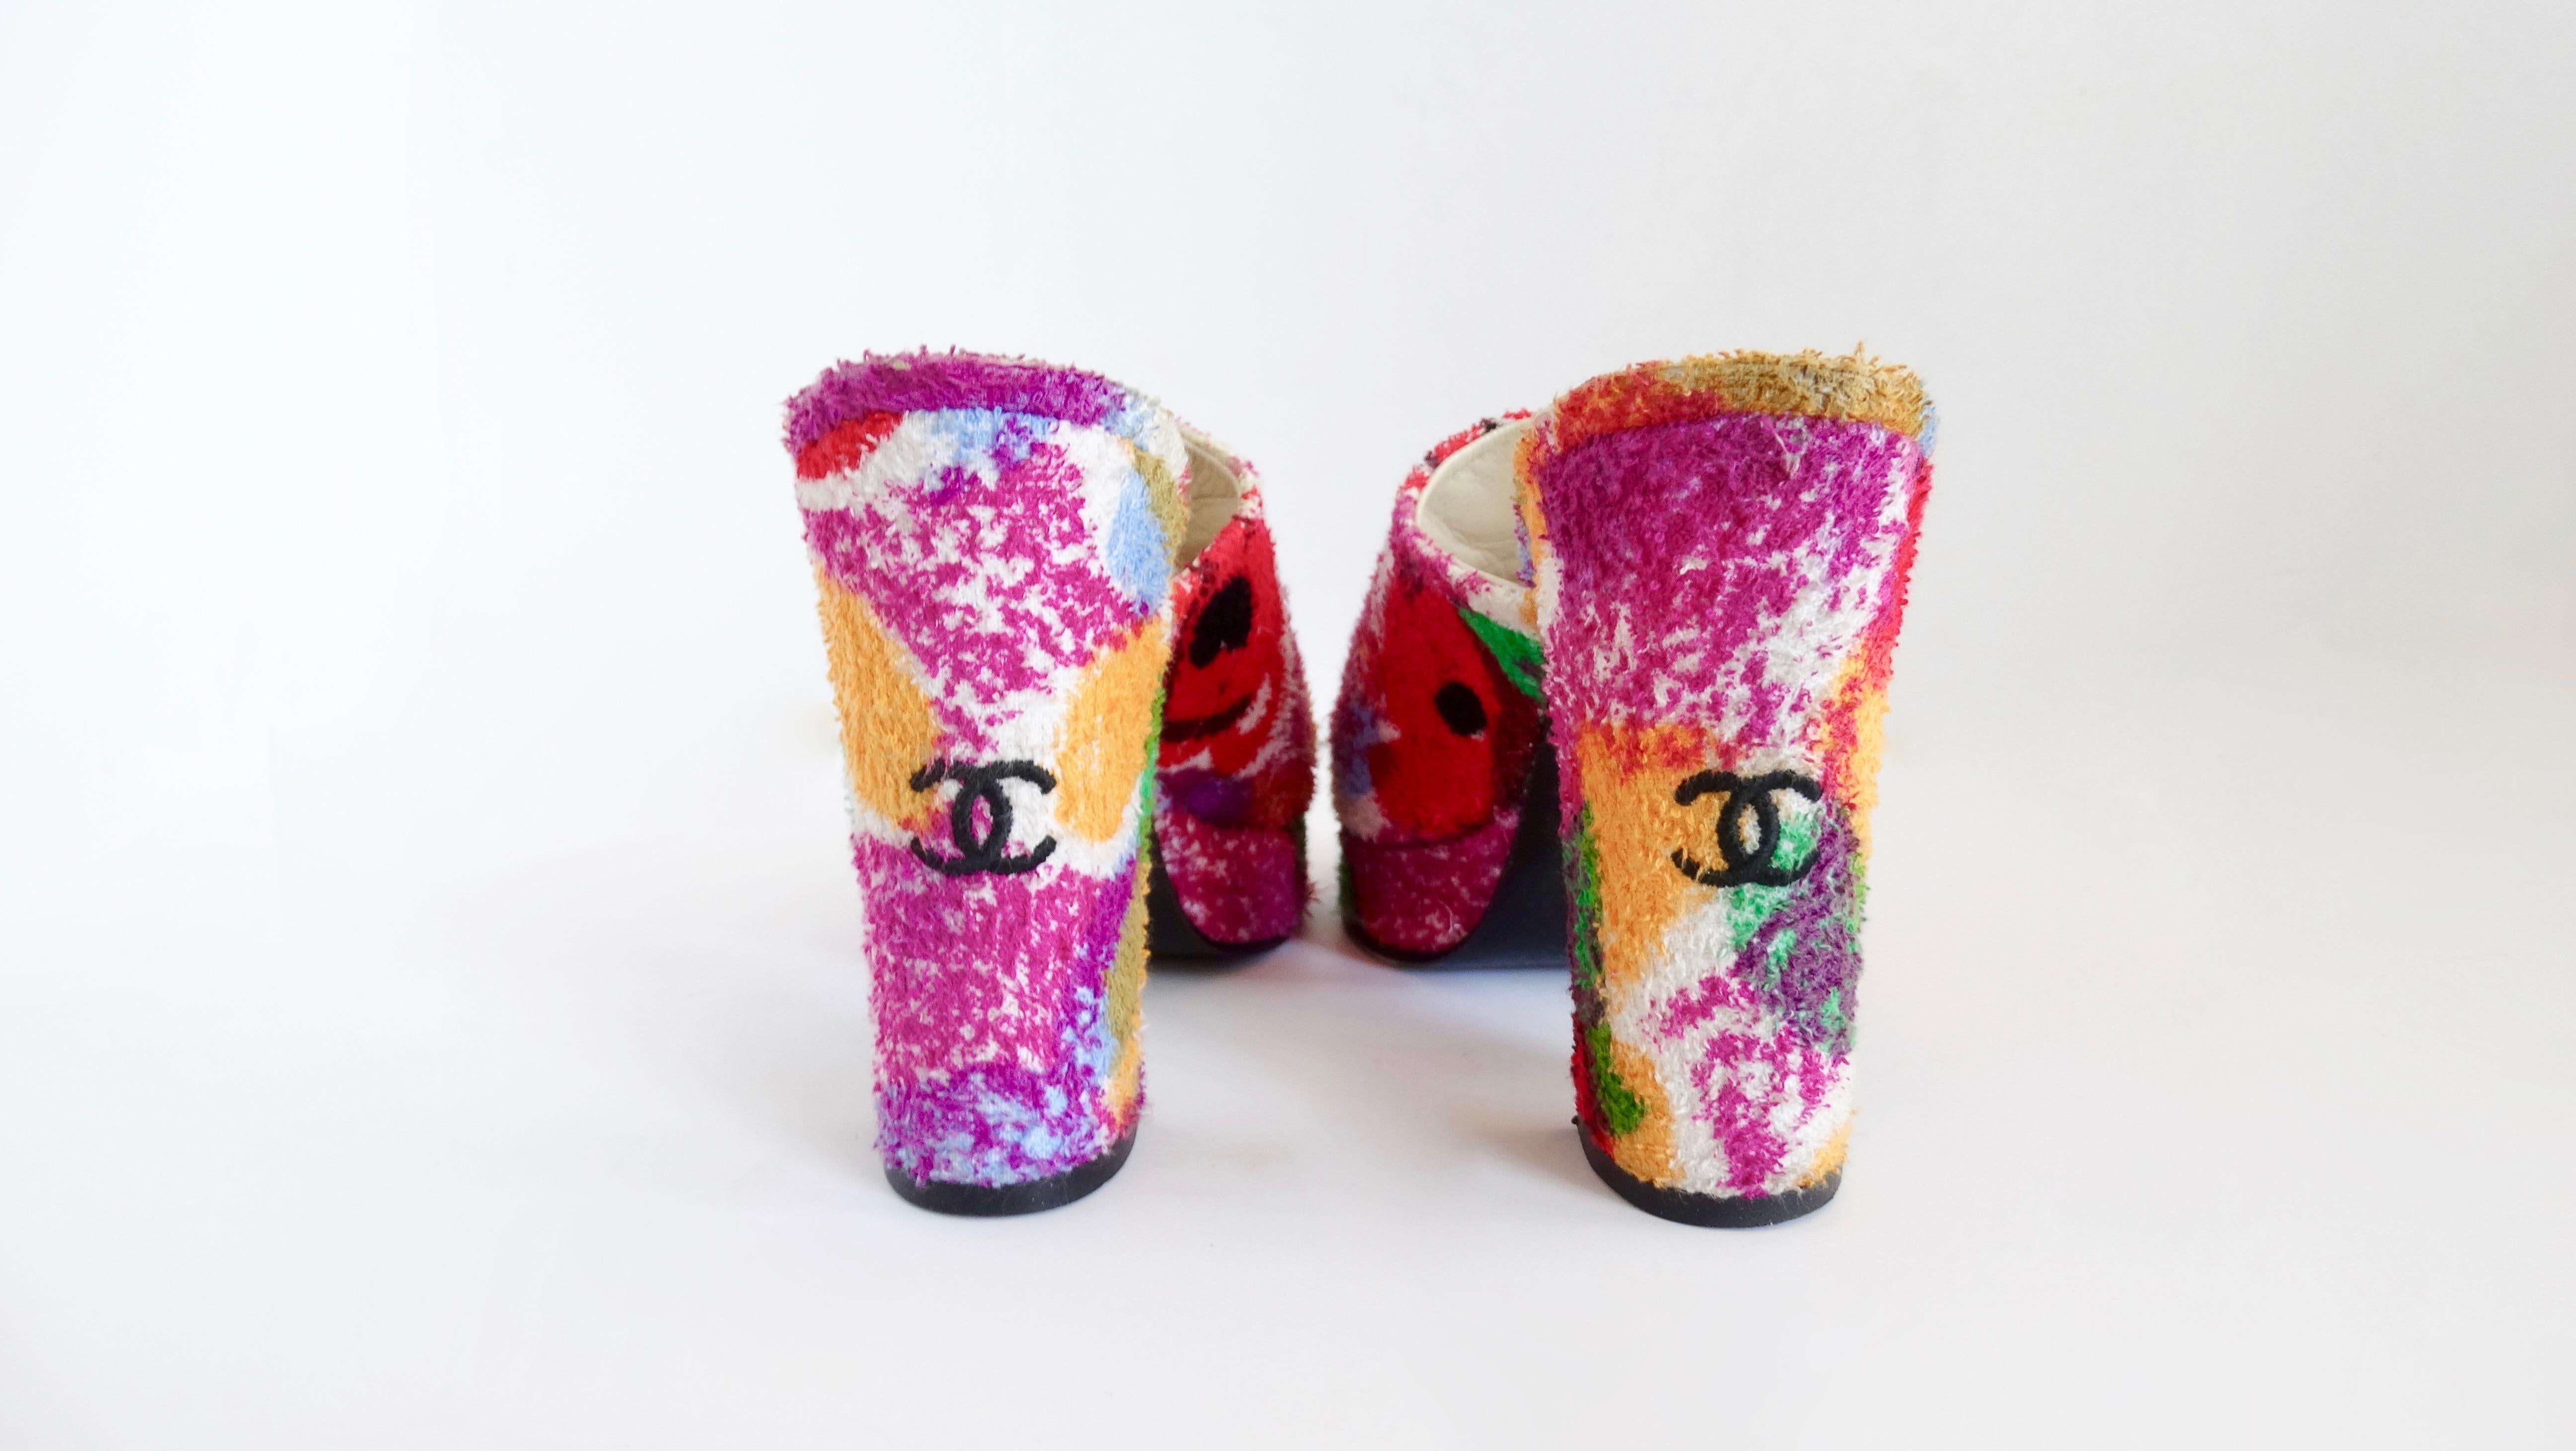 Elevate your summer looks with these adorable Chanel mules! Circa 1990s, these terry-cloth mules feature a bright poppy/floral pattern with small black CC's on the back heel. The perfect shoes to pair with denim and take on all your sunny vacations!